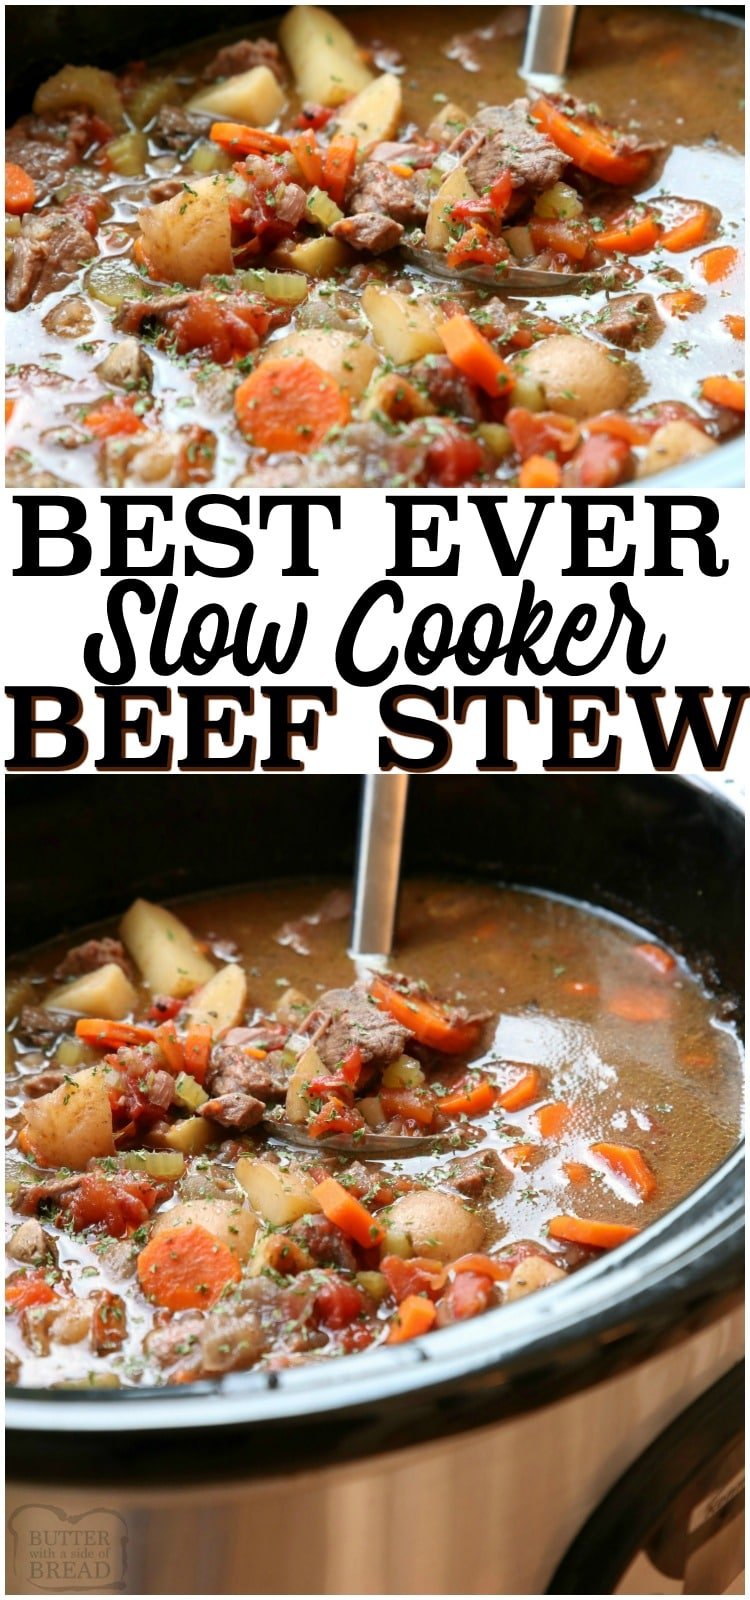 Best Crock Pot Beef Stew recipe made with tender chunks of beef, loads of vegetables and a simple mixture of broth and spices that yields incredible home style beef stew. Tips for making more flavorful stew & time saving ideas to make faster stew. #stew #beef #dinner #beefstew #crockpot #slowcooker #recipe from BUTTER WITH A SIDE OF BREAD